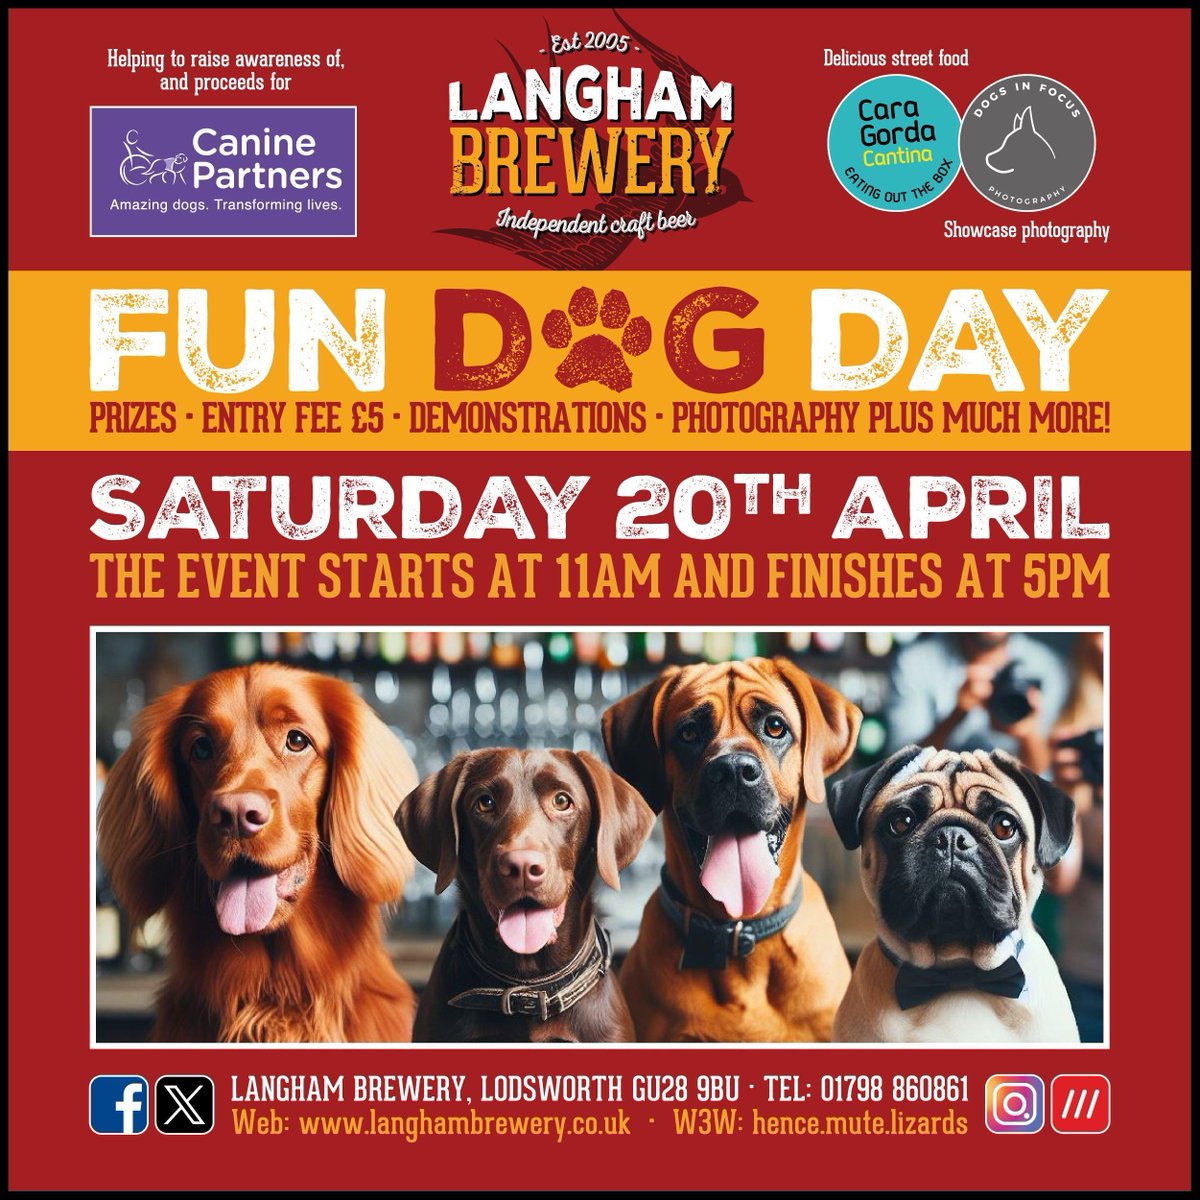 Our Fun Fun Dog Day is on Saturday 20th April, and we'd love you to join us. We're celebrating all things 4 paws and waggy tails with a (very relaxed) Fun Dog Day in support of @canine_partners bit.ly/LBrewery #dogshow #dogfunday #brewery #sussex